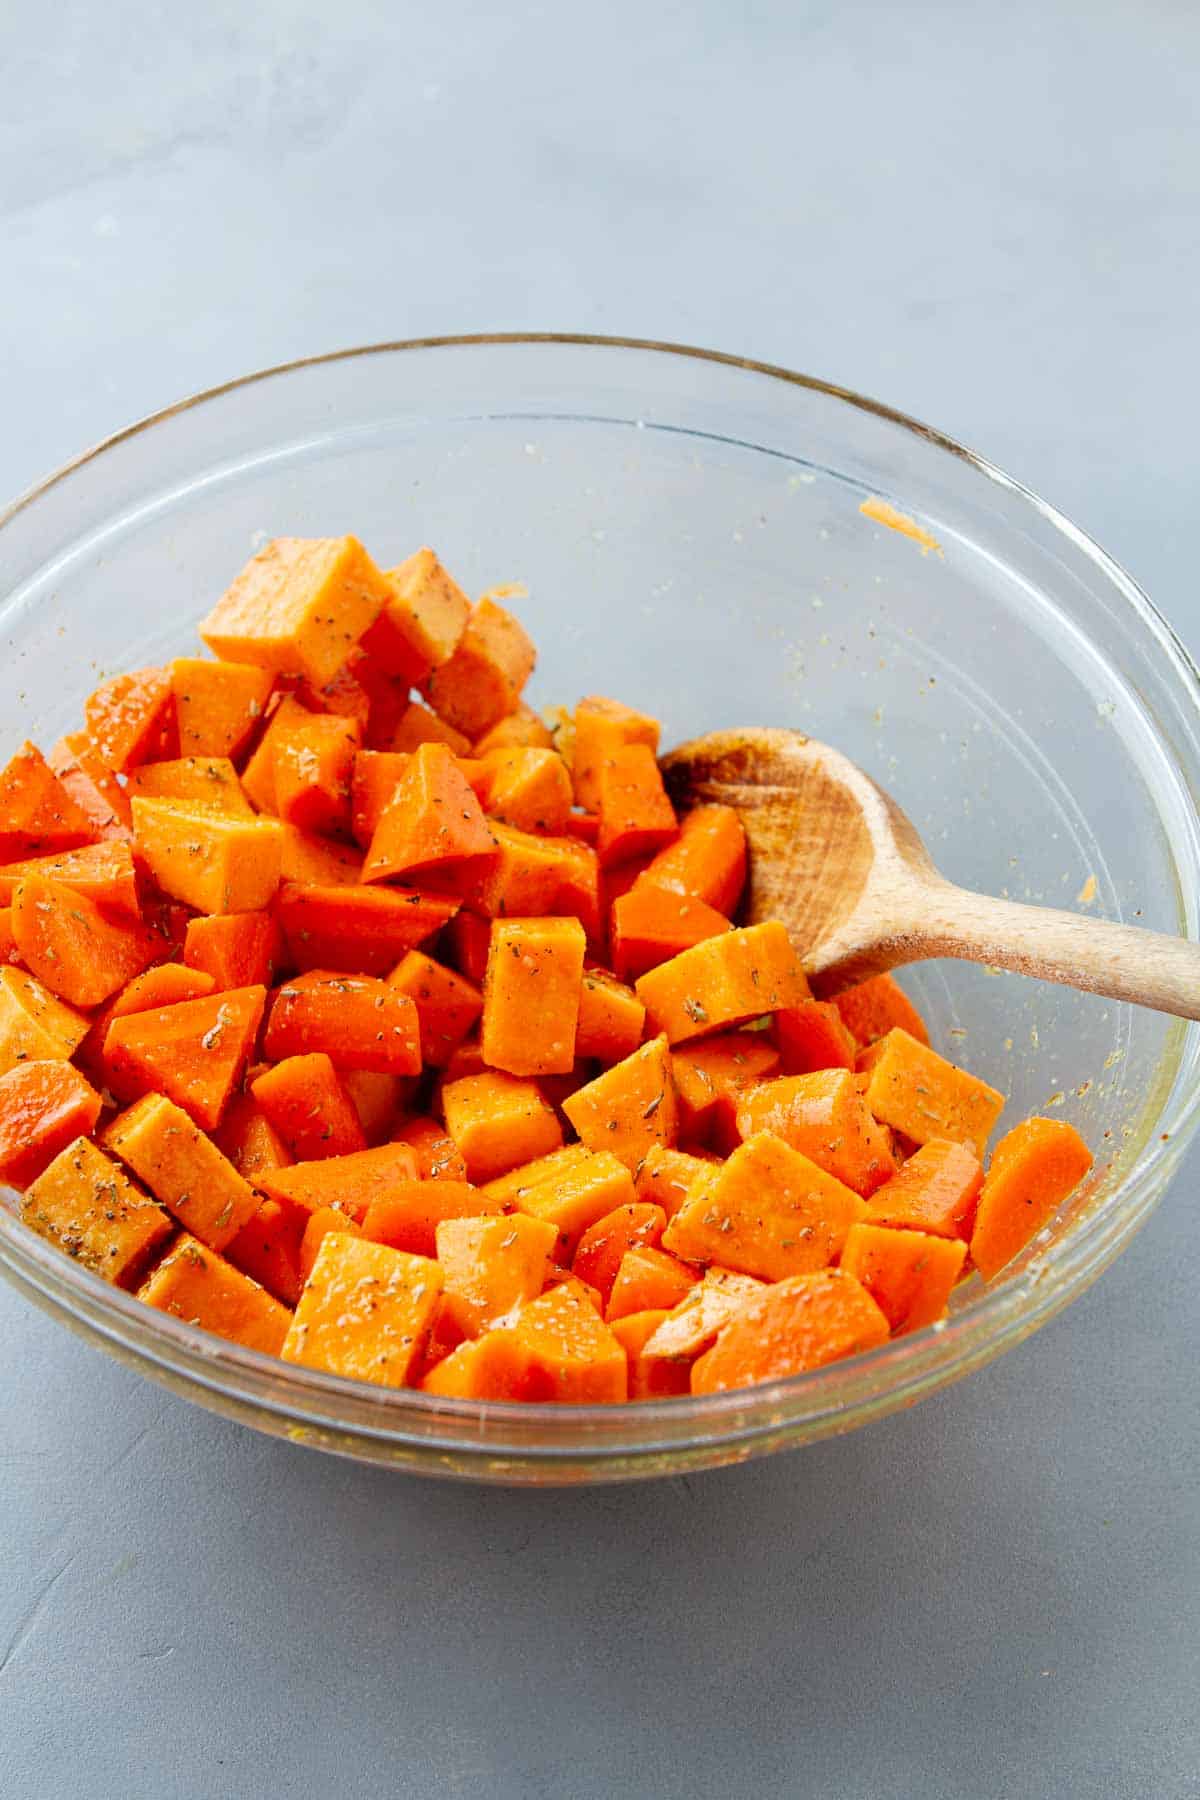 Chopped sweet potatoes and carrots in a glass bowl.